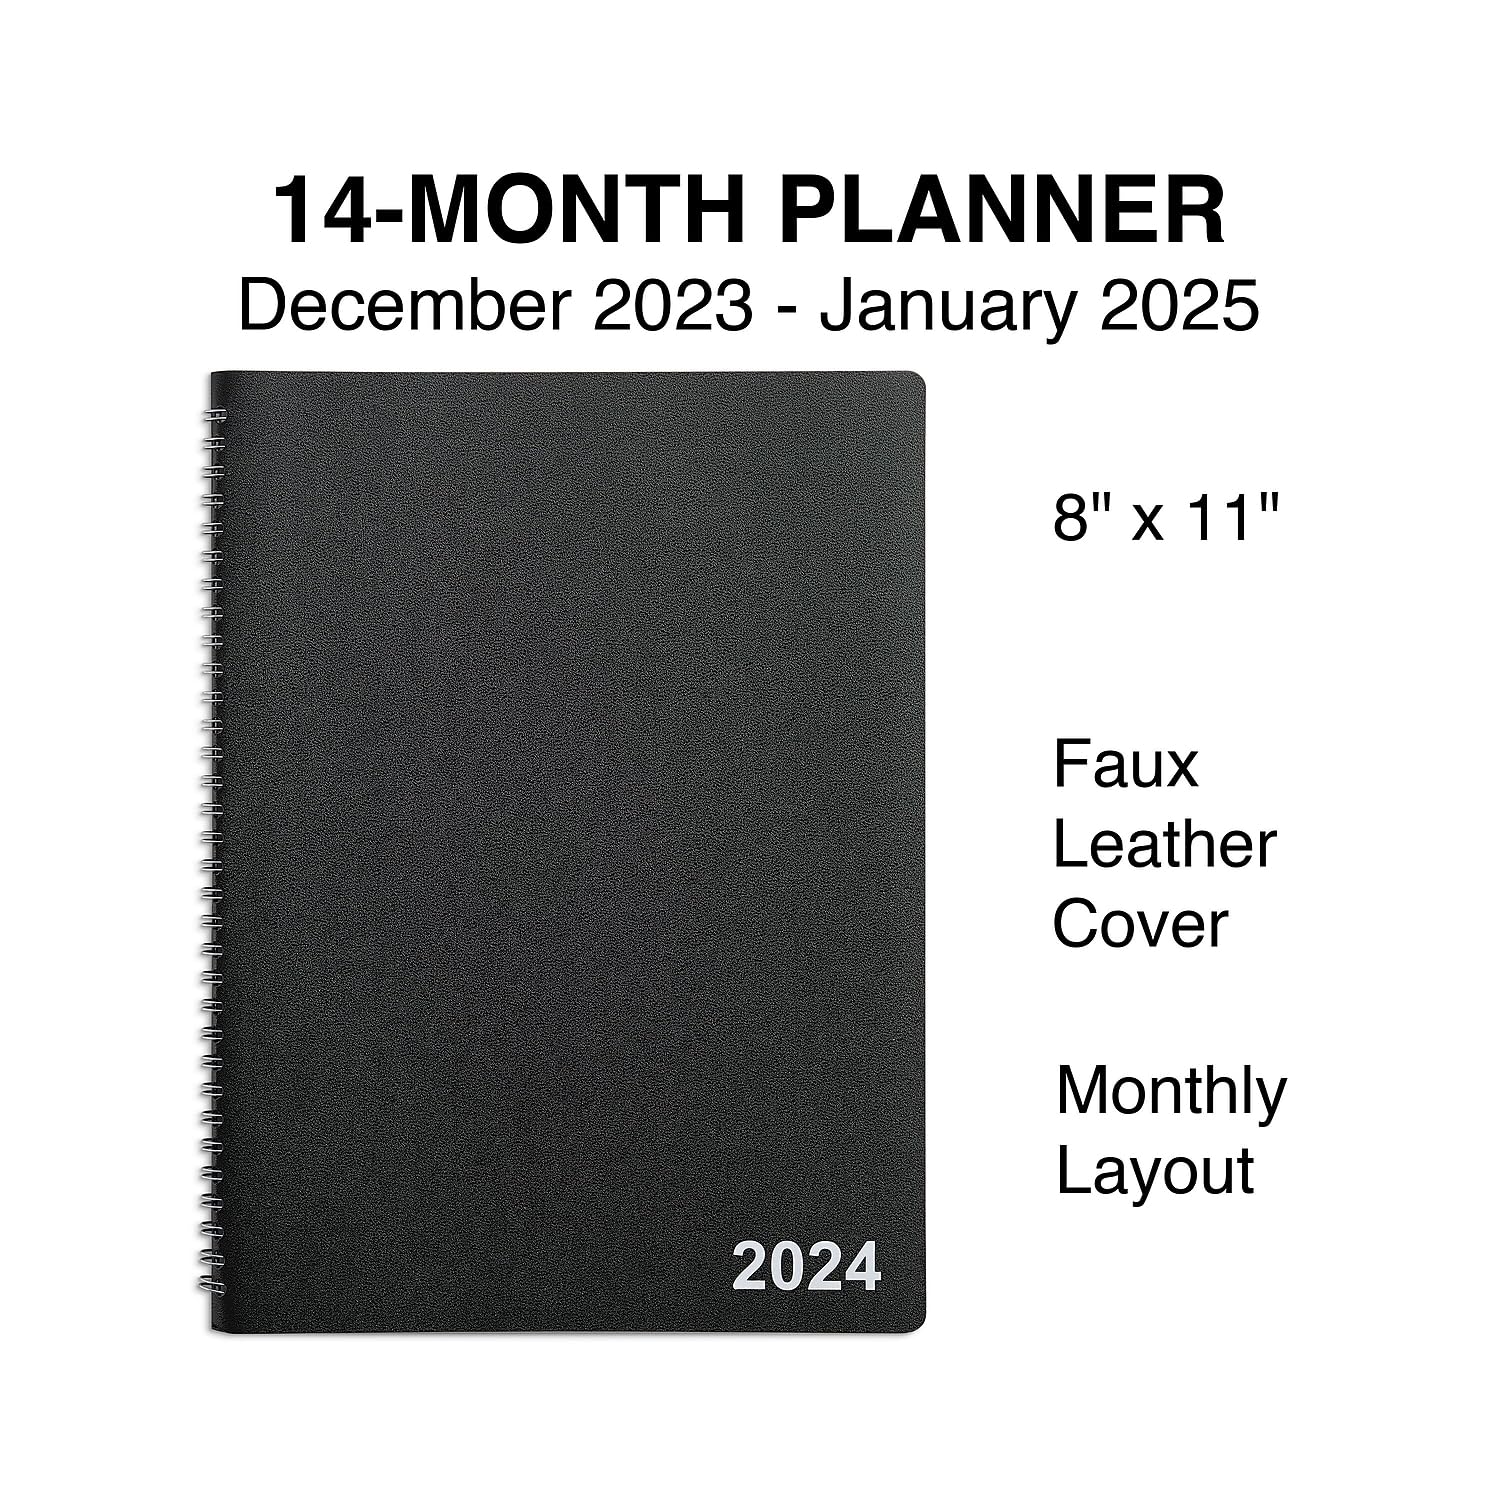 STAPLES 2024 8-inch x 11-inch Monthly Planner, Black (TR52184-24)